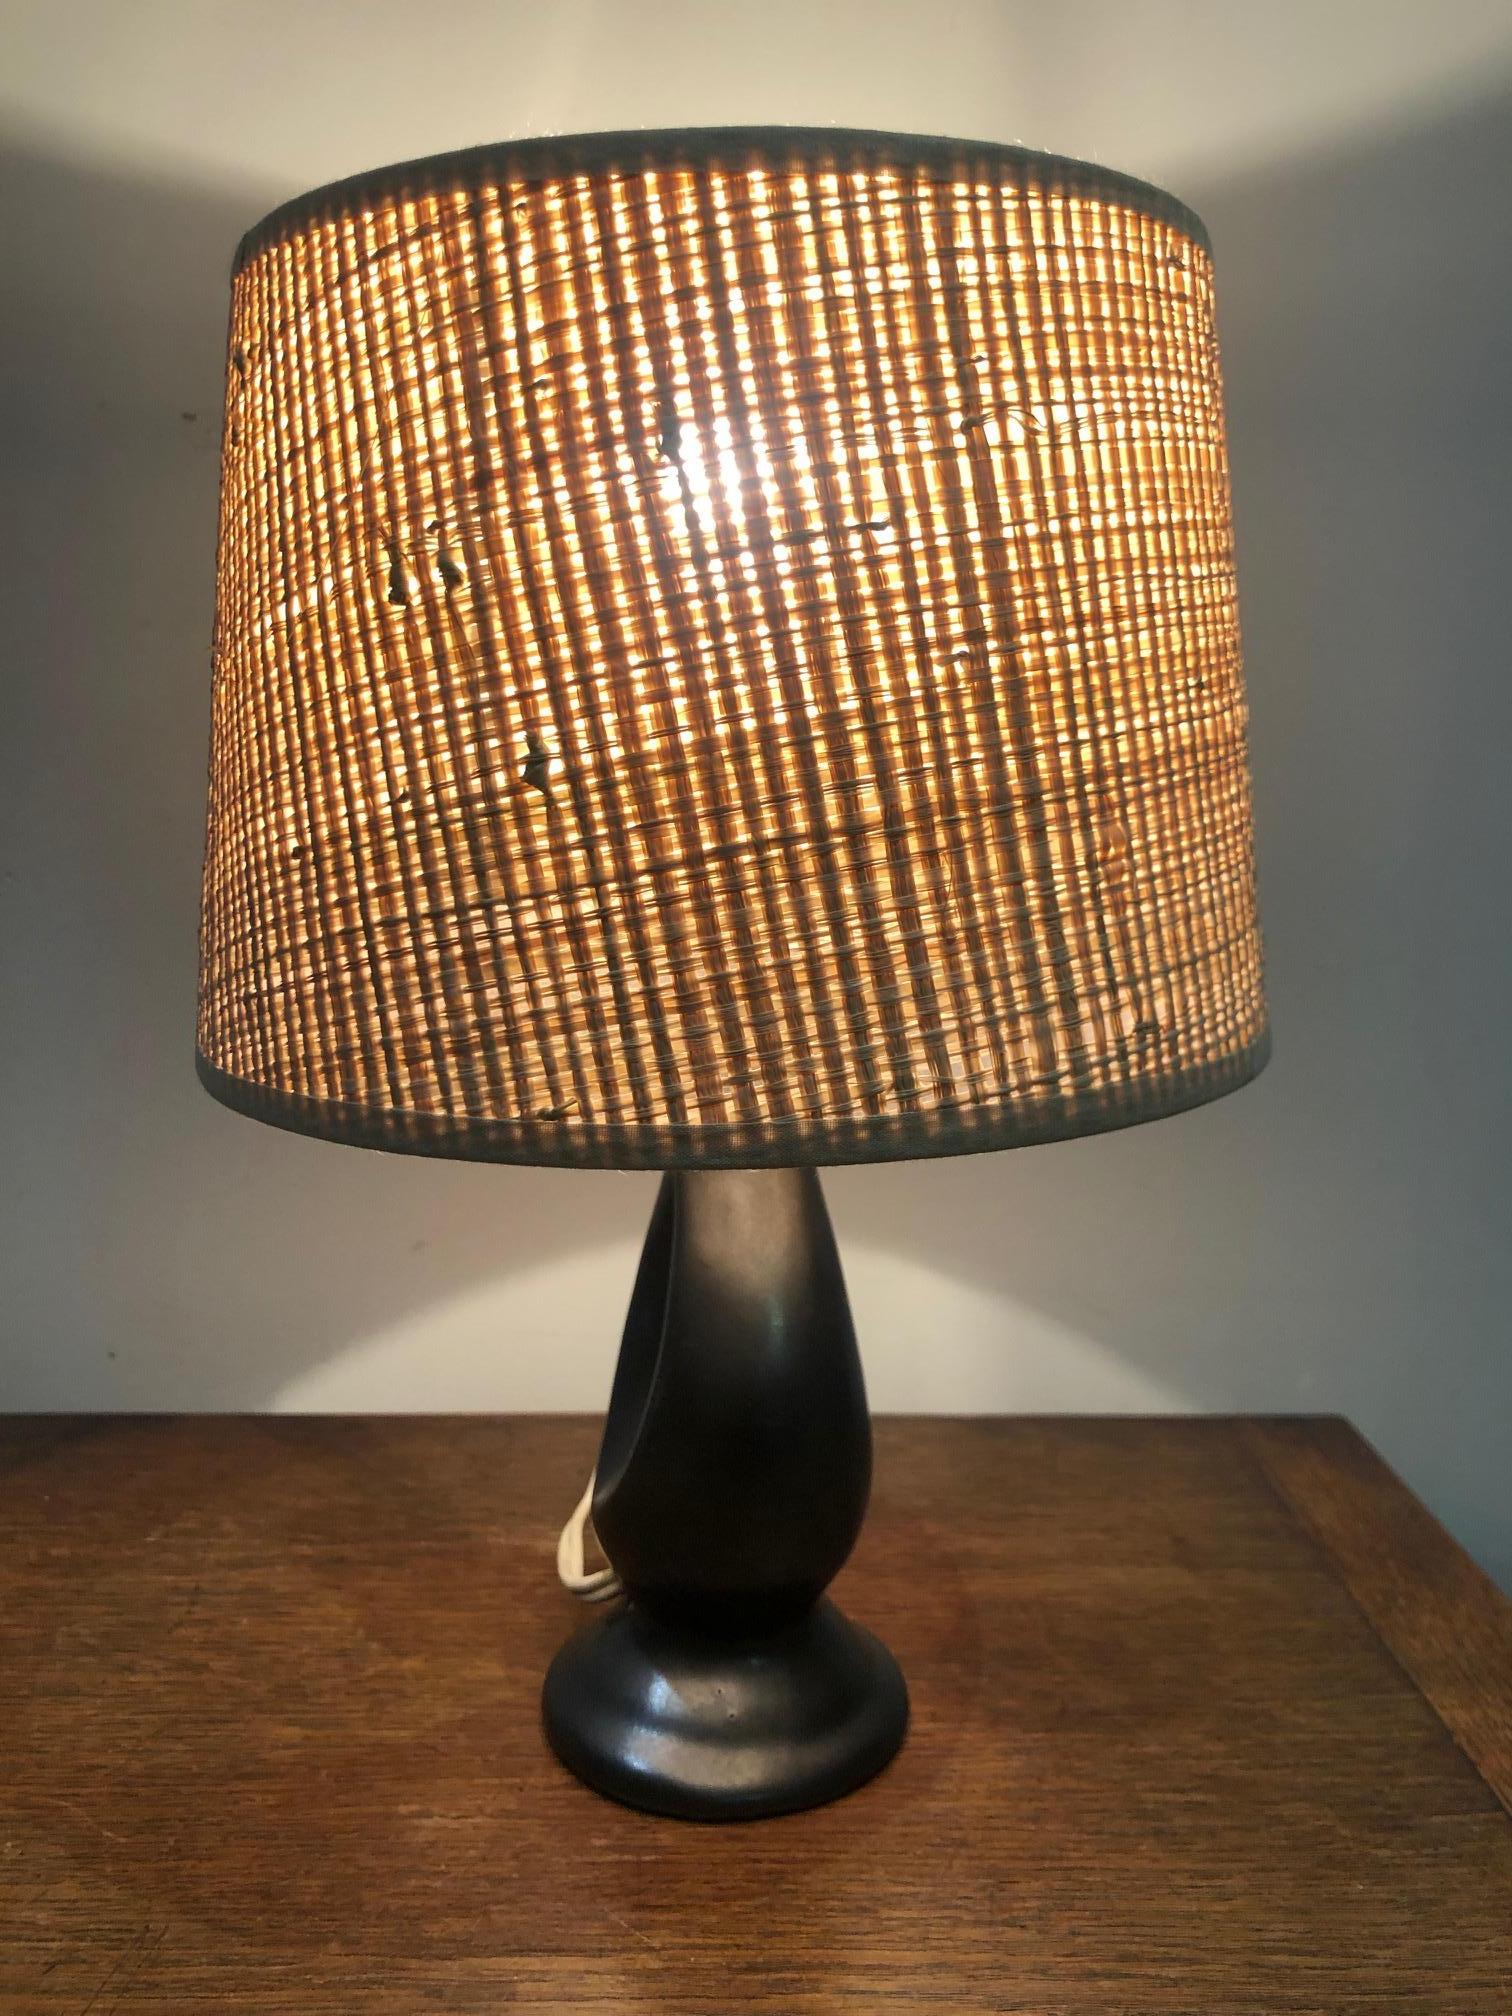 20th Century Ceramic Table Lamp from the 1950s